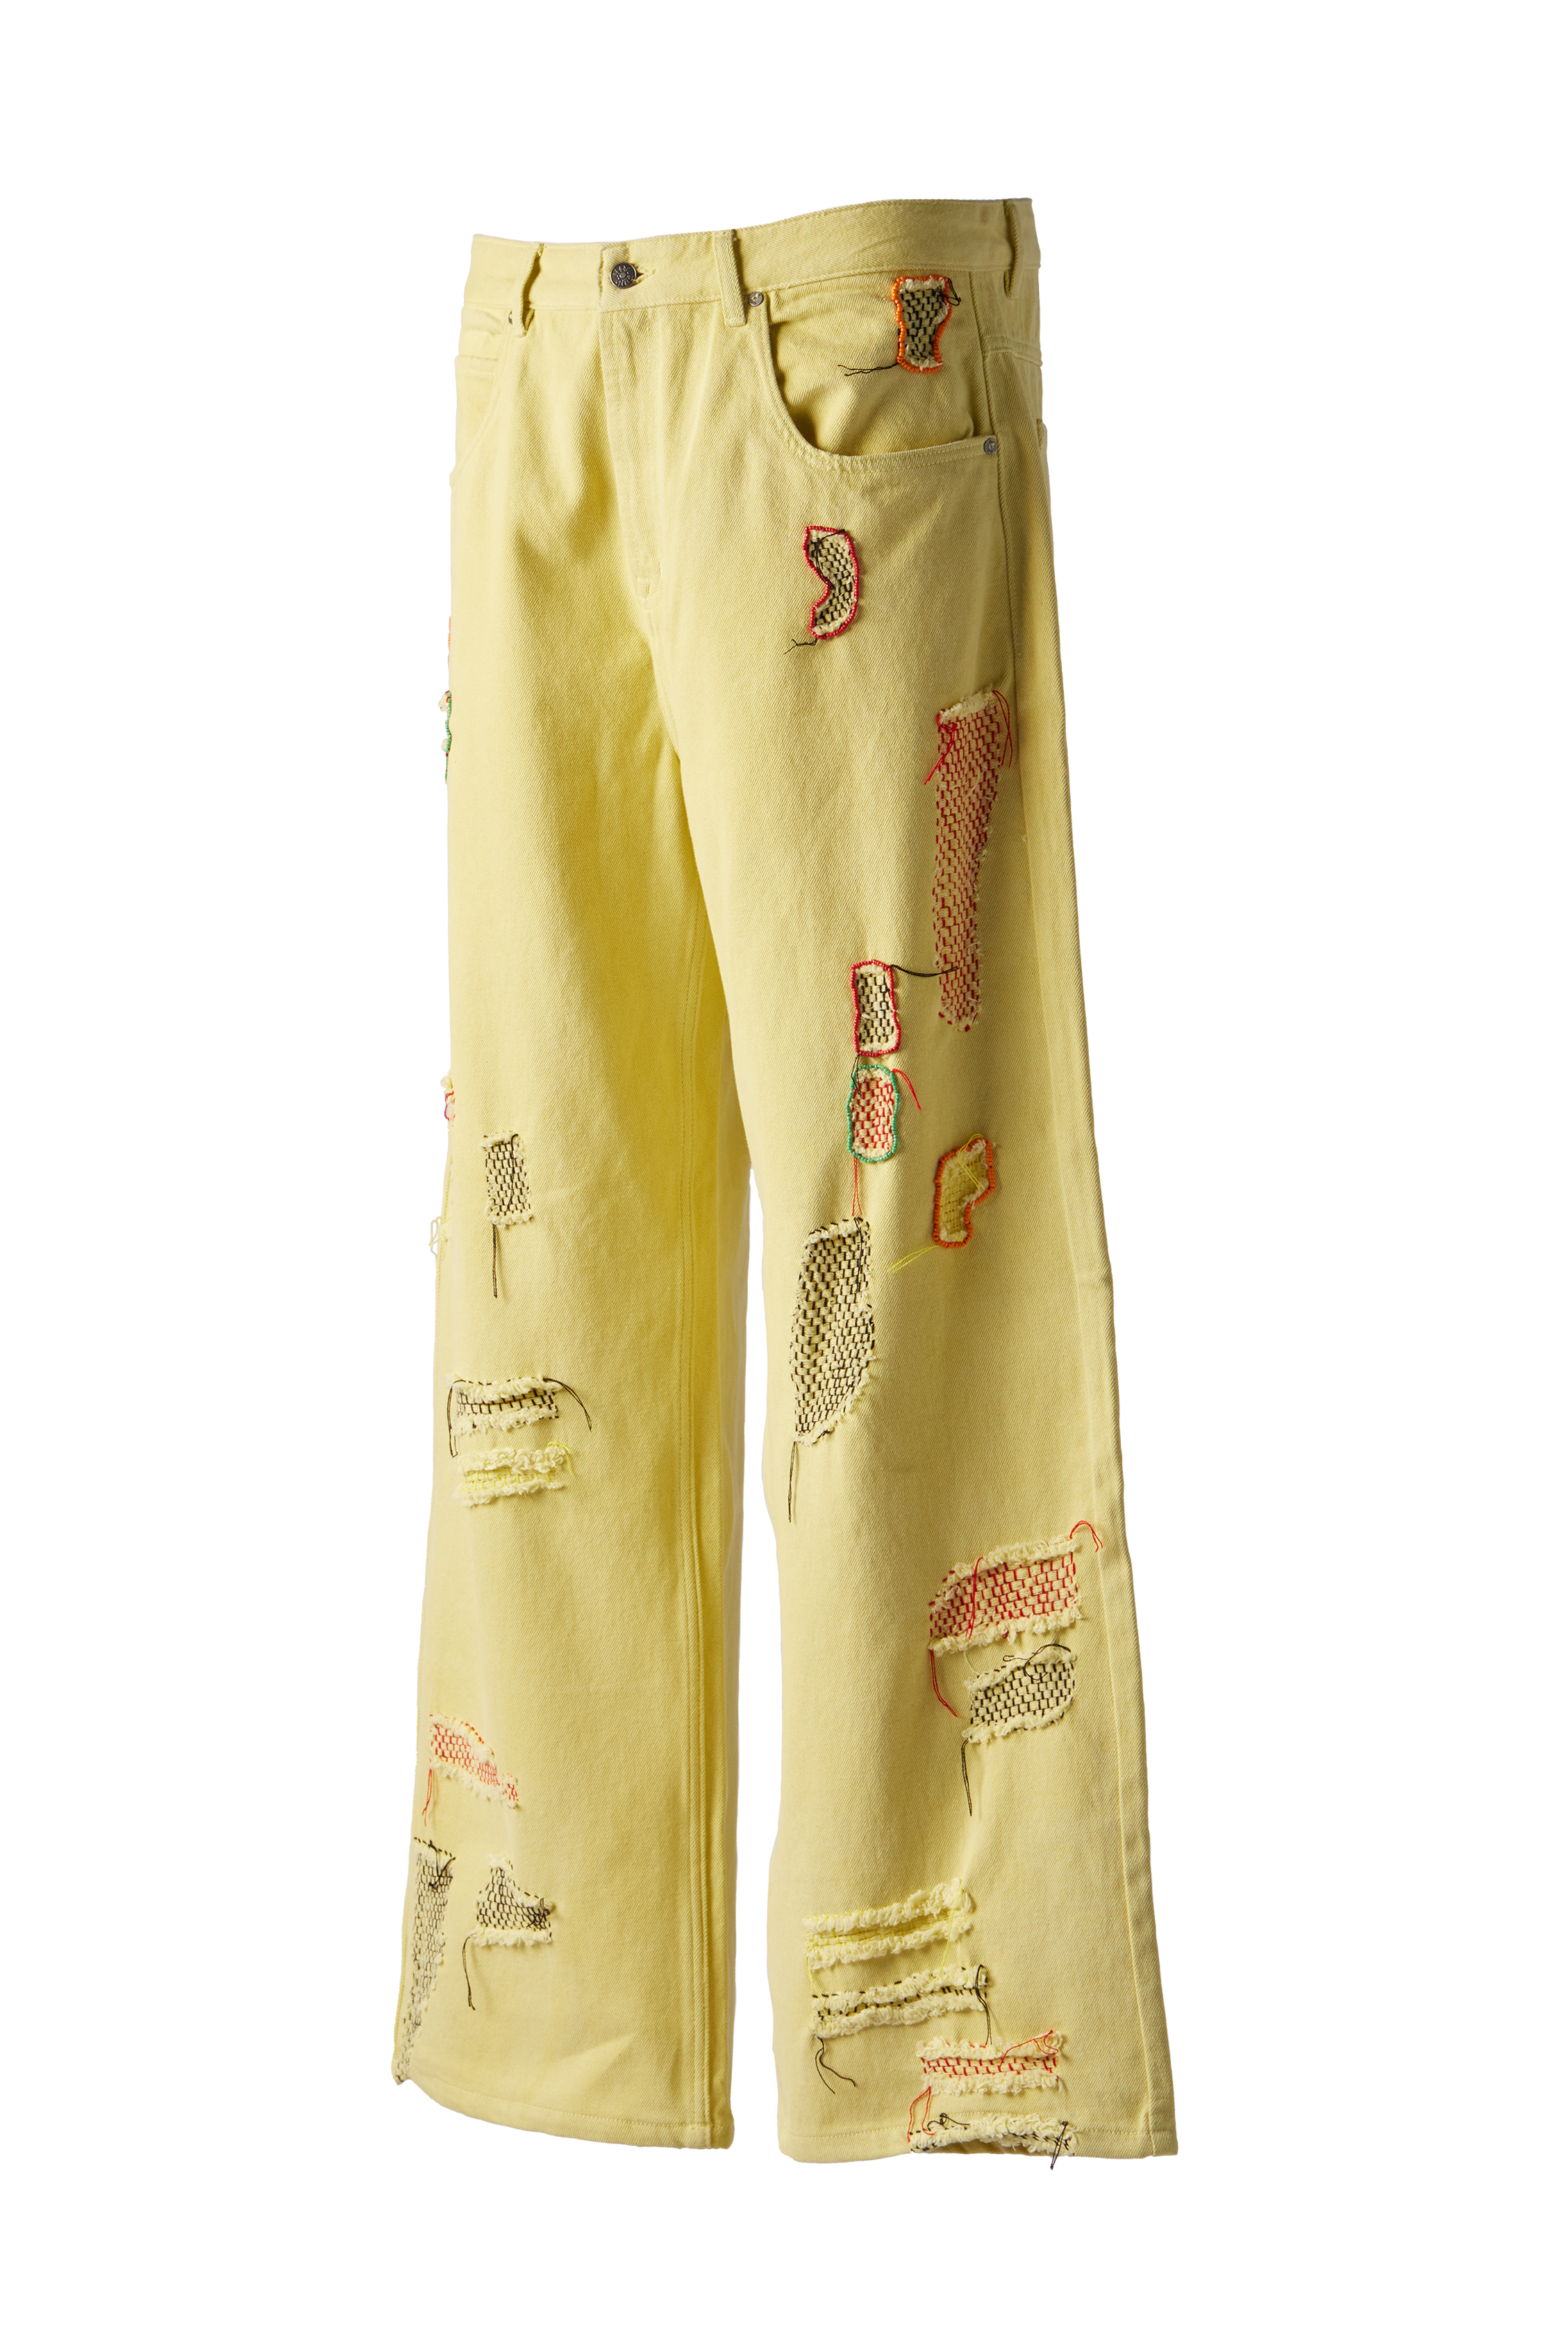 GLASS CYPRESS - Yellow Reconstructed Shredded Denim product image